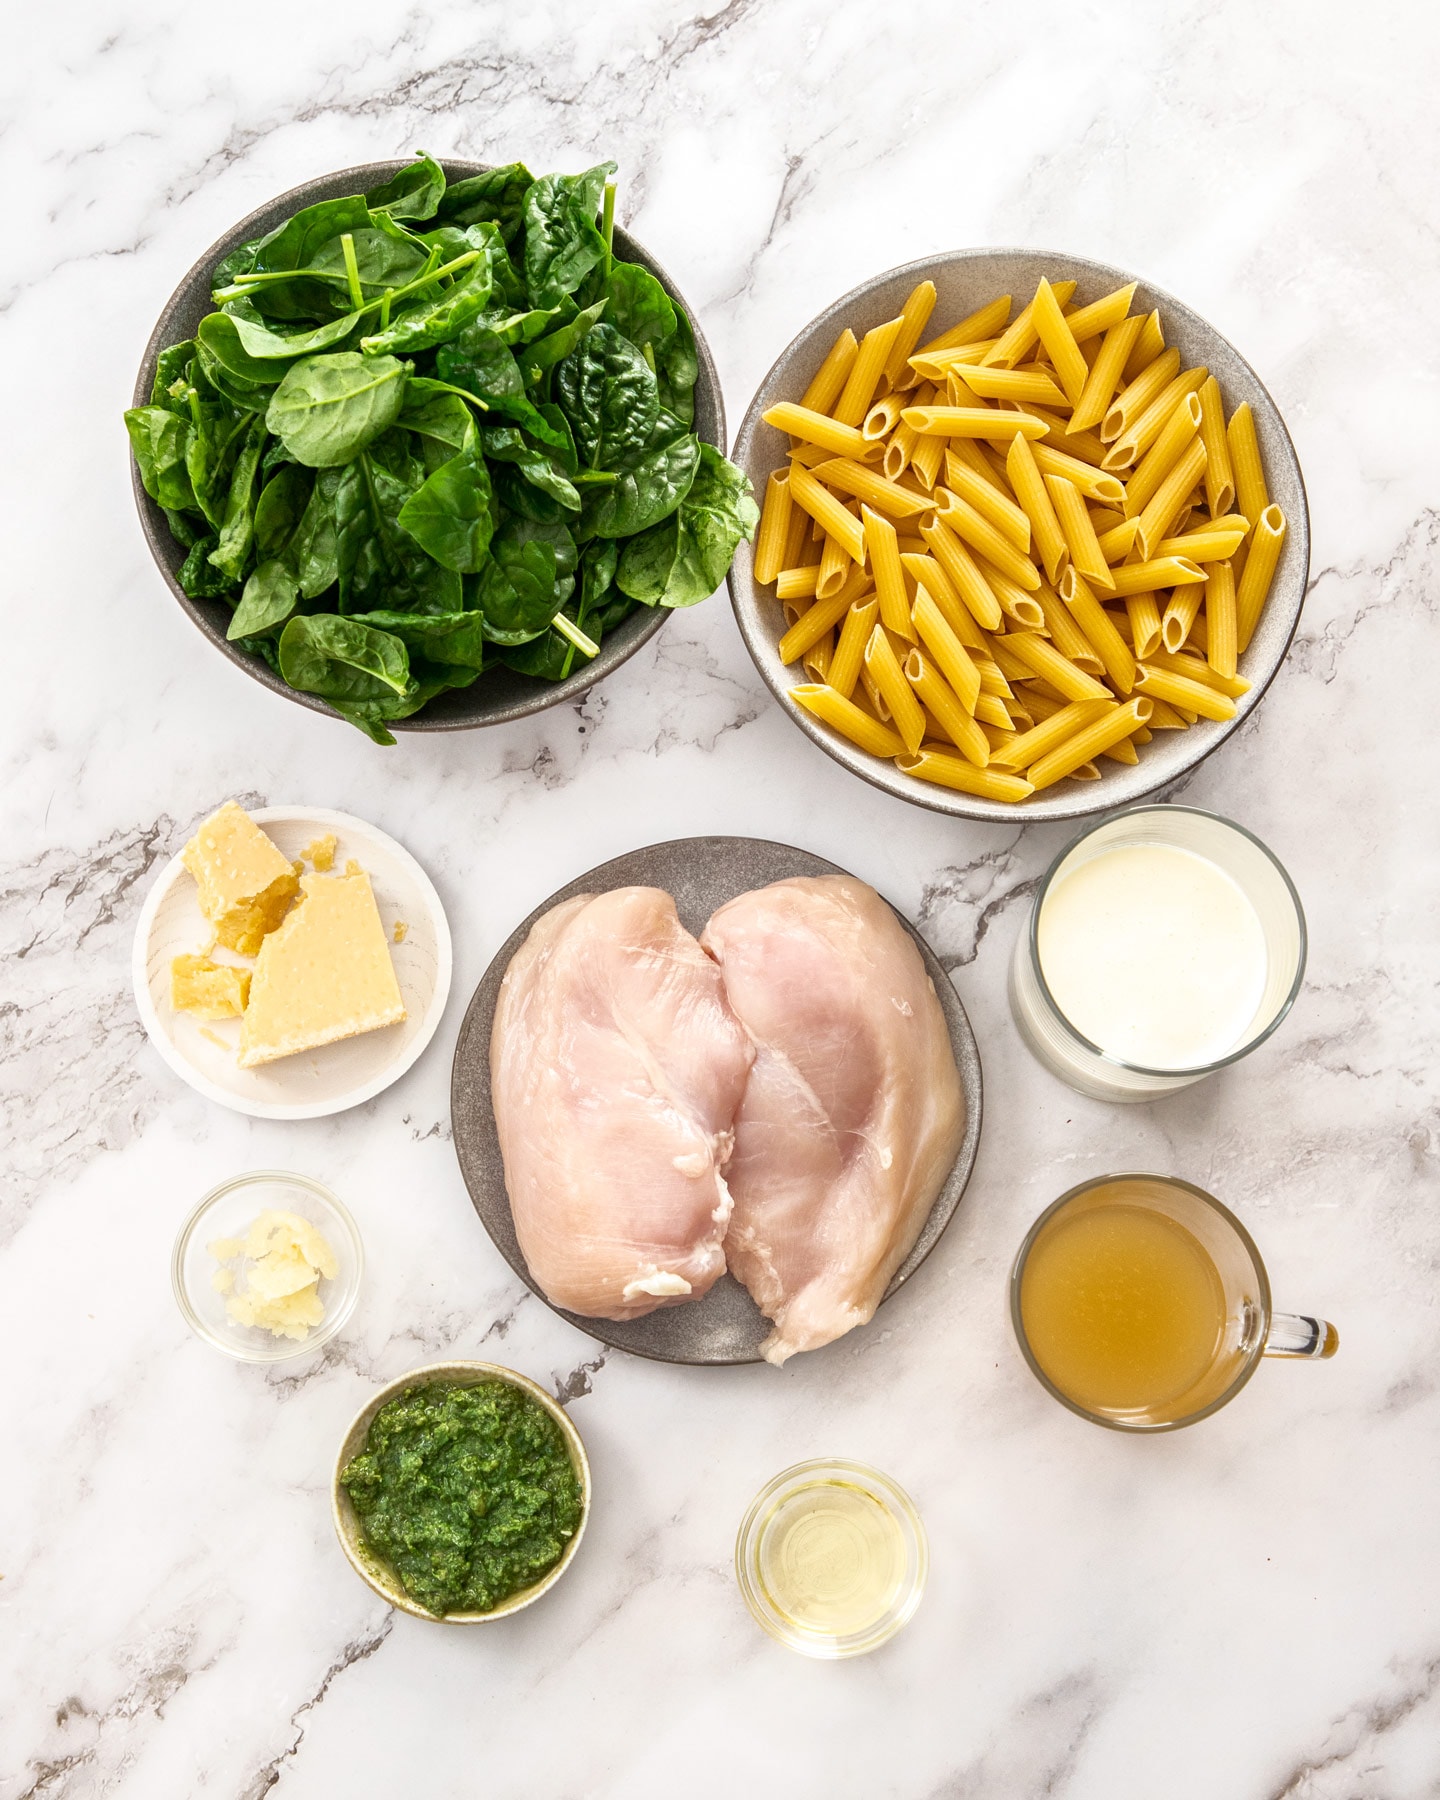 Ingredients for chicken spinach pasta on a marble surface.